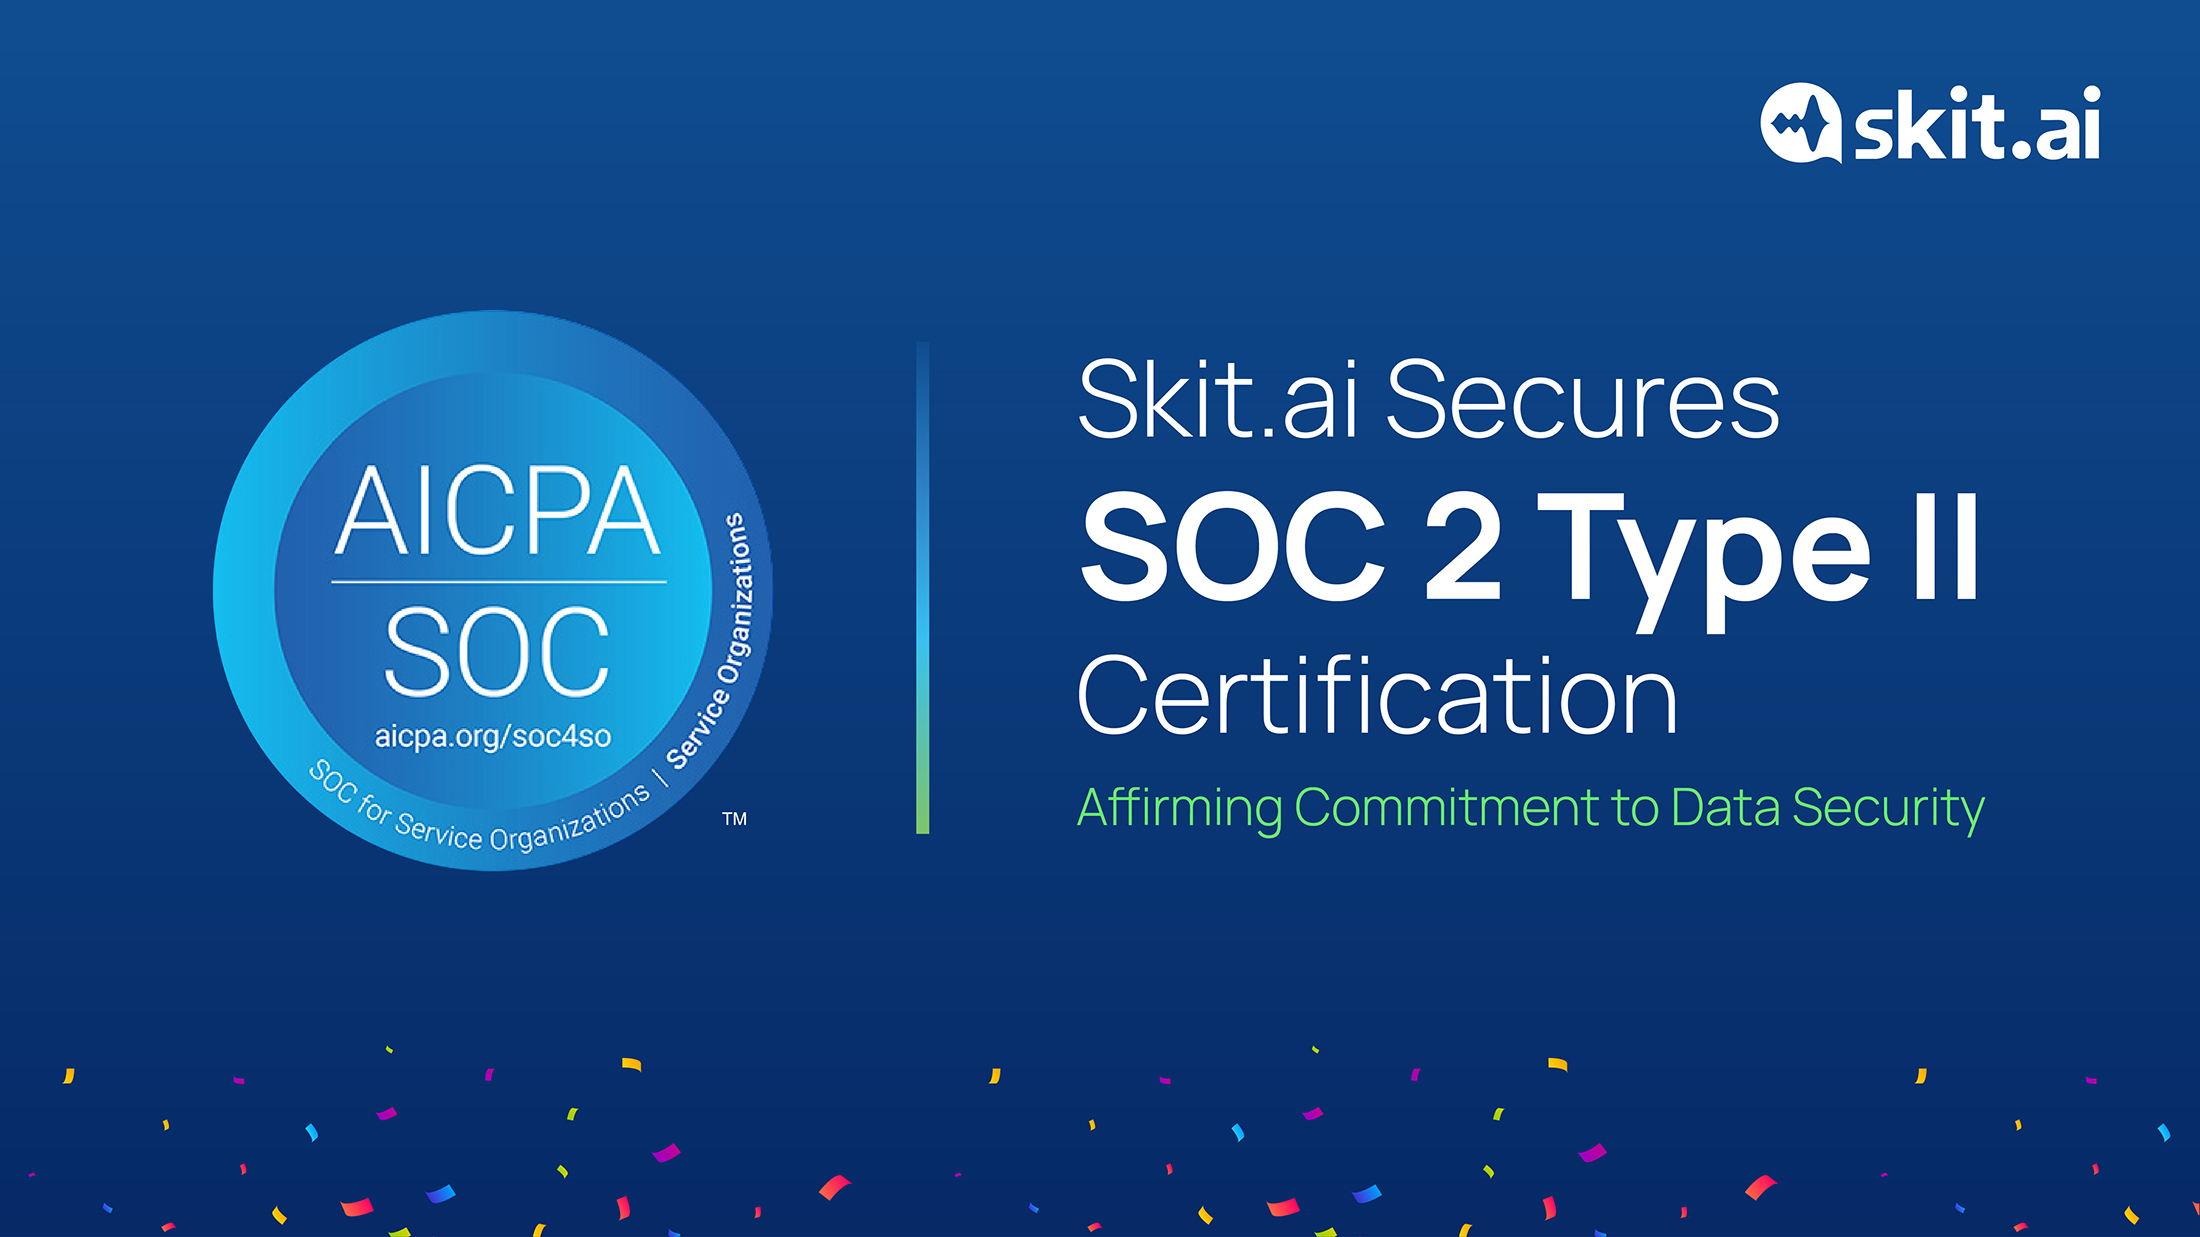 Skit.ai Secures SOC 2 Type II Certification, Affirming Commitment to Data Security